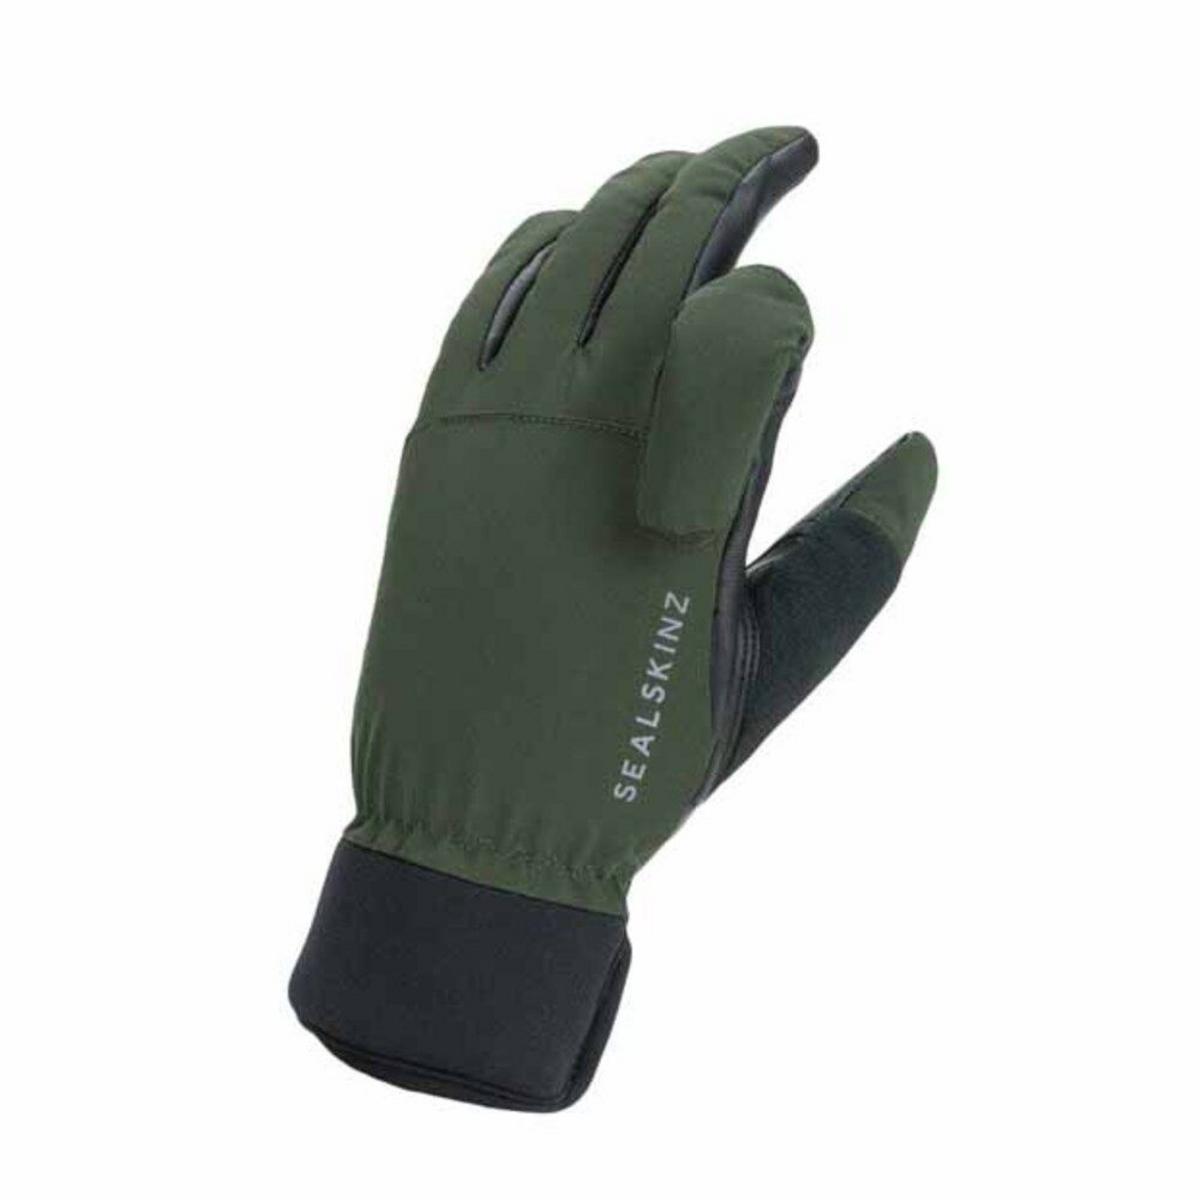 SealSkinz Broome Waterproof All Weather Shooting Gloves